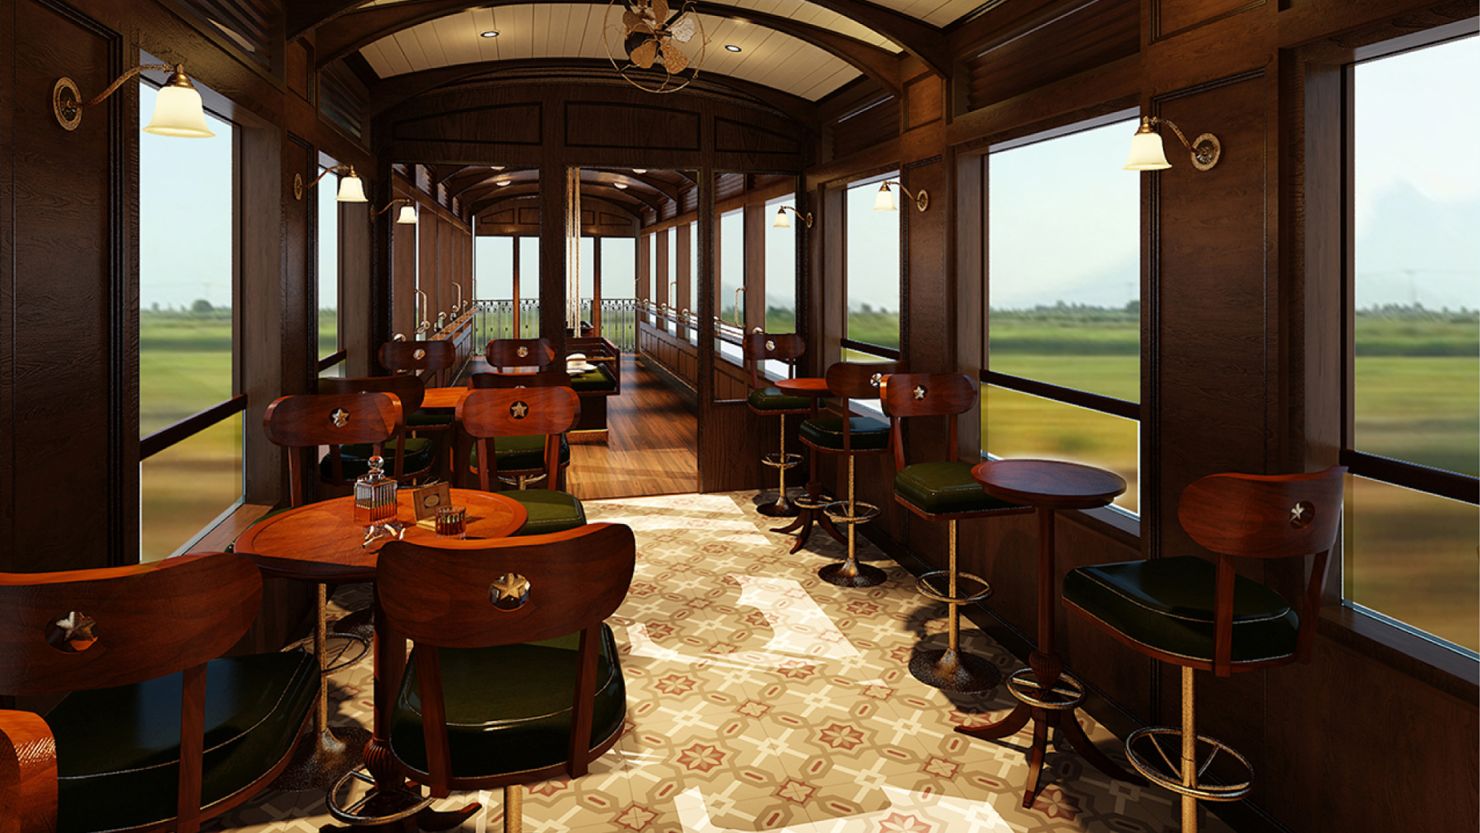 A rendering of the interior of the refurbished Revolution Express steam trains that will begin taking passengers in late 2024 or early 2025.